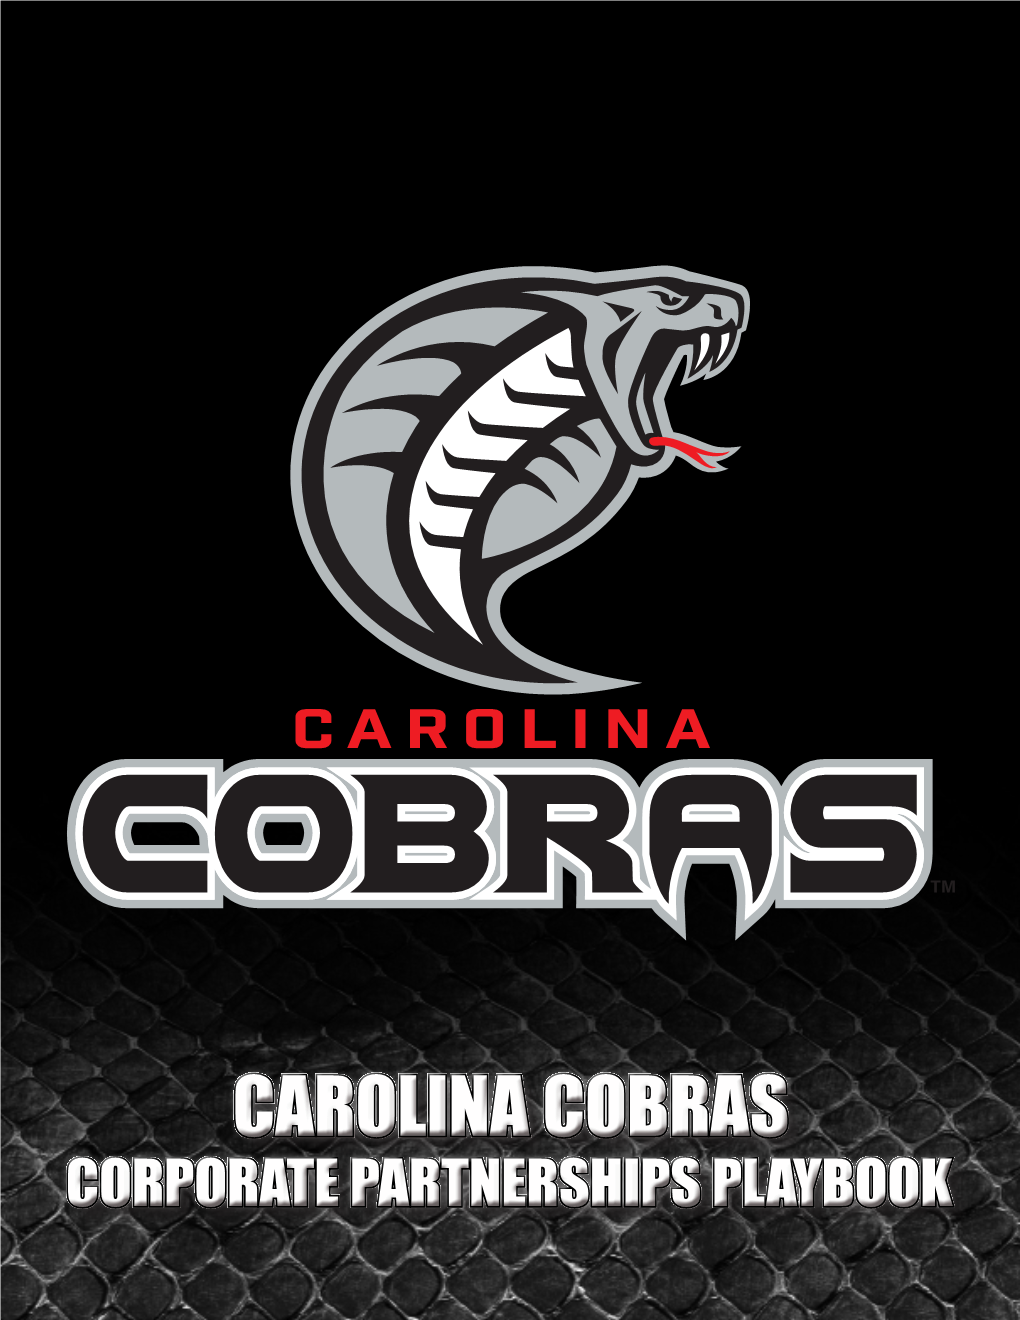 CAROLINA COBRAS CORPORATE PARTNERSHIPS PLAYBOOK the Carolina Cobras Provide Our Corporate Partners with a Unique, Exciting and Effective Marketing Environment